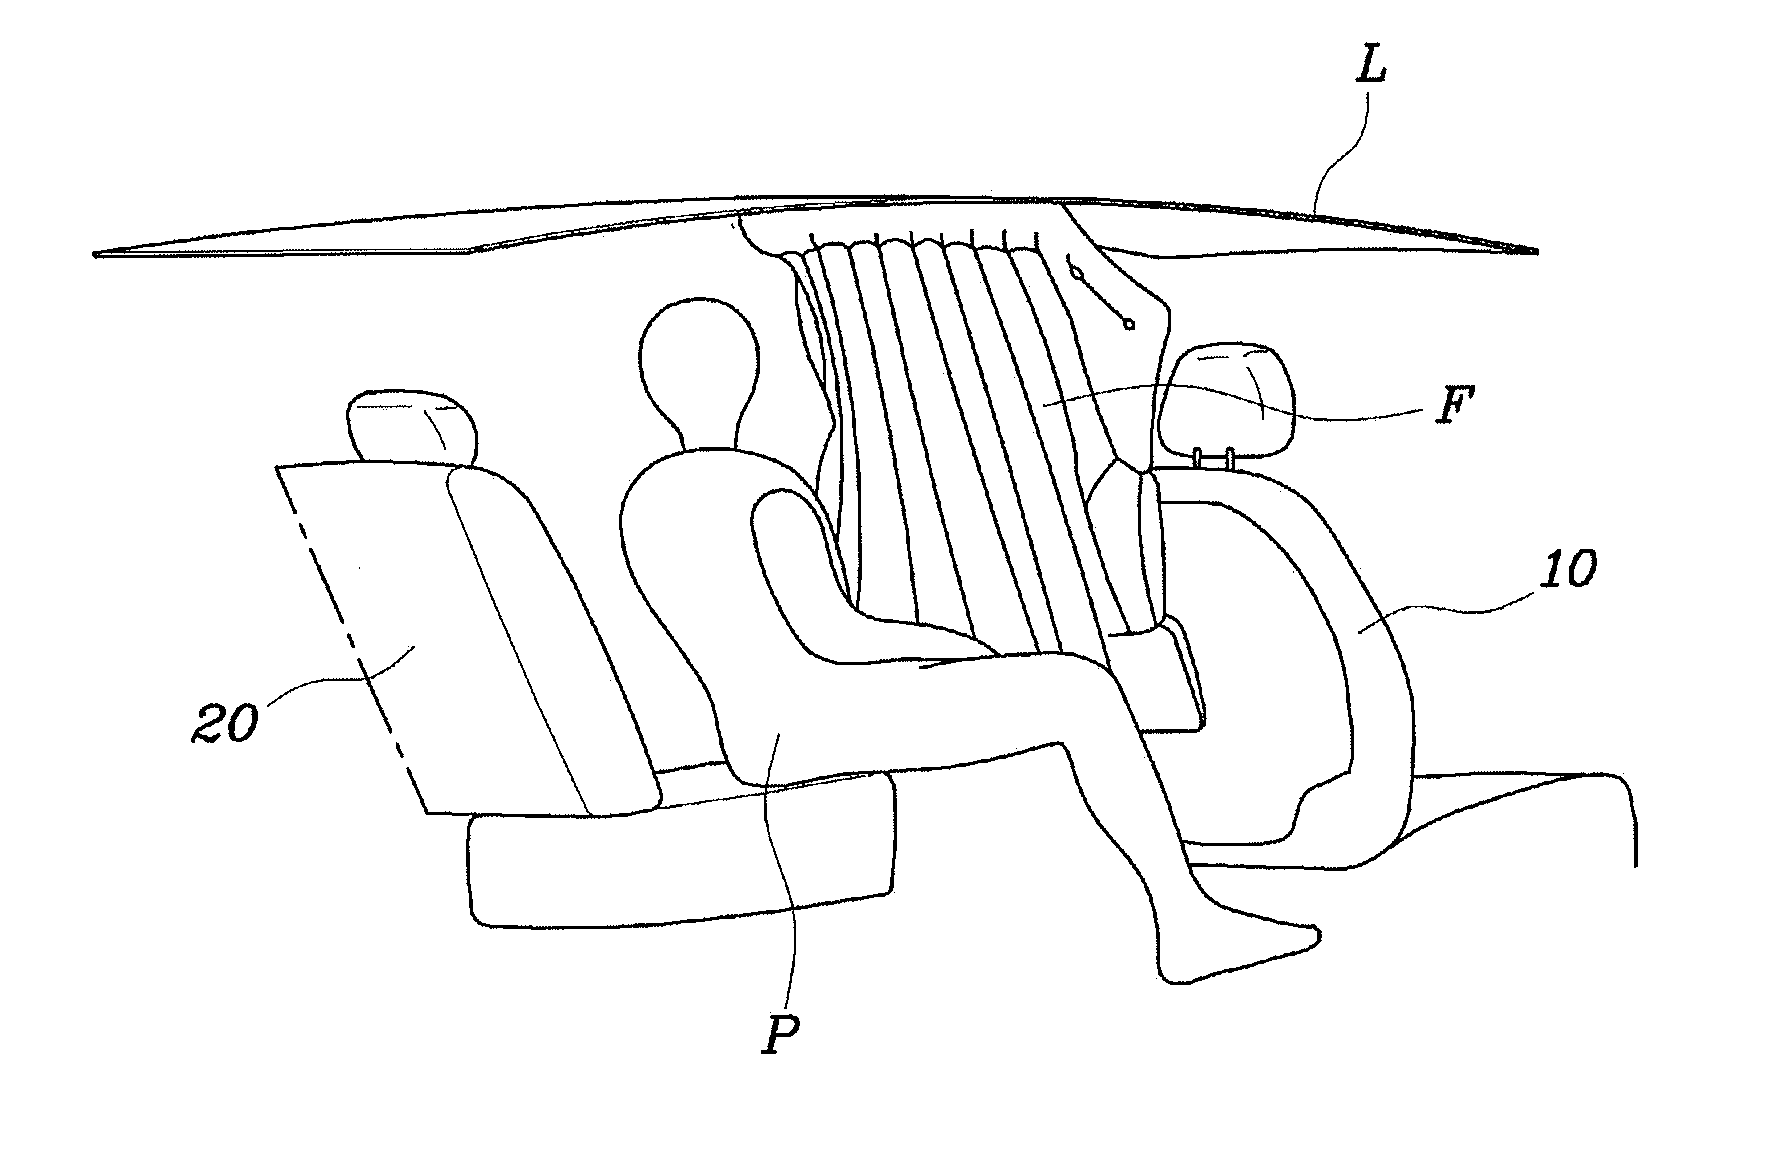 Frontal center curtain airbag for vehicle